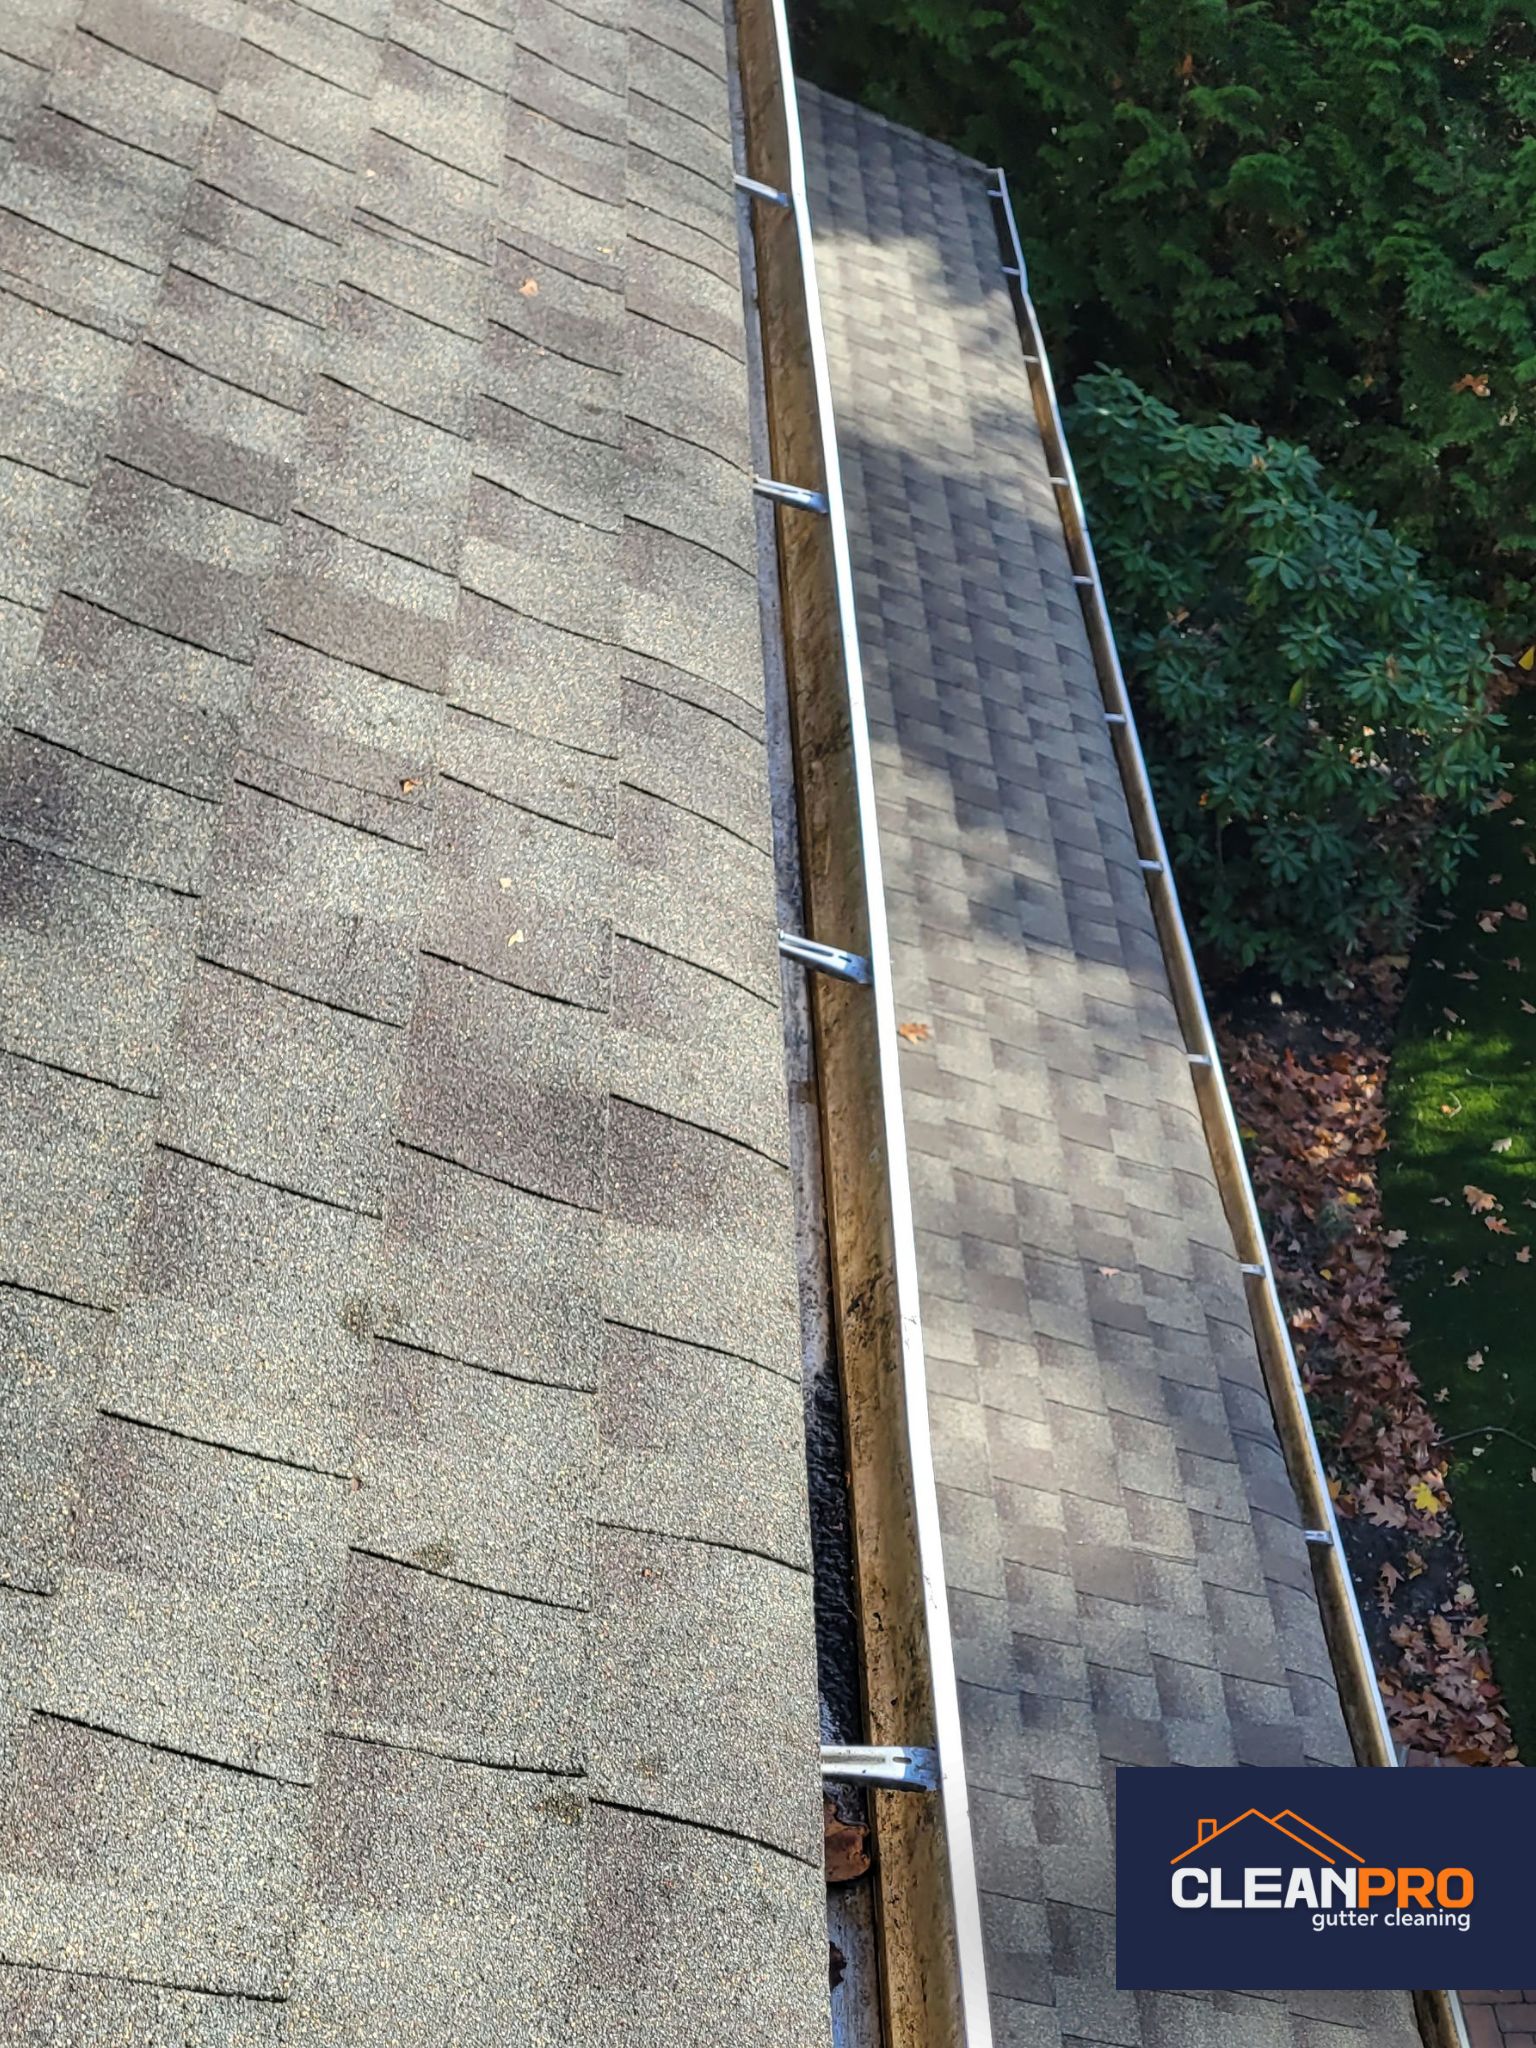 Local Gutter Cleaning in Pittsburgh PA